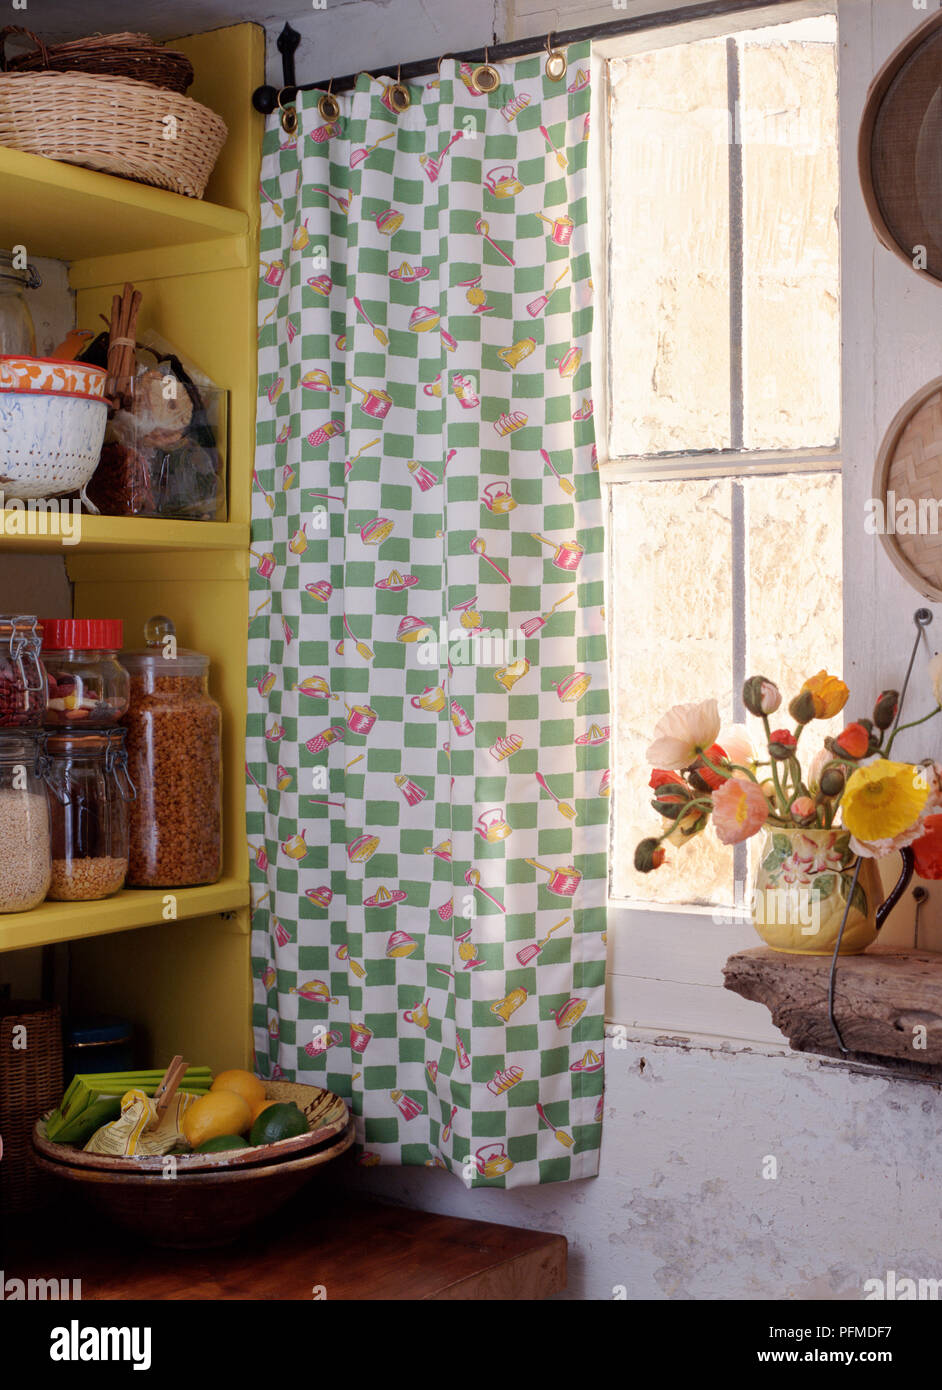 Cottage window viewed from inside; eyelet curtain with green check and kitchen utensils on hanging rail over window, vase of flowers standing on rough wooden table, yellow shelves beside. Stock Photo